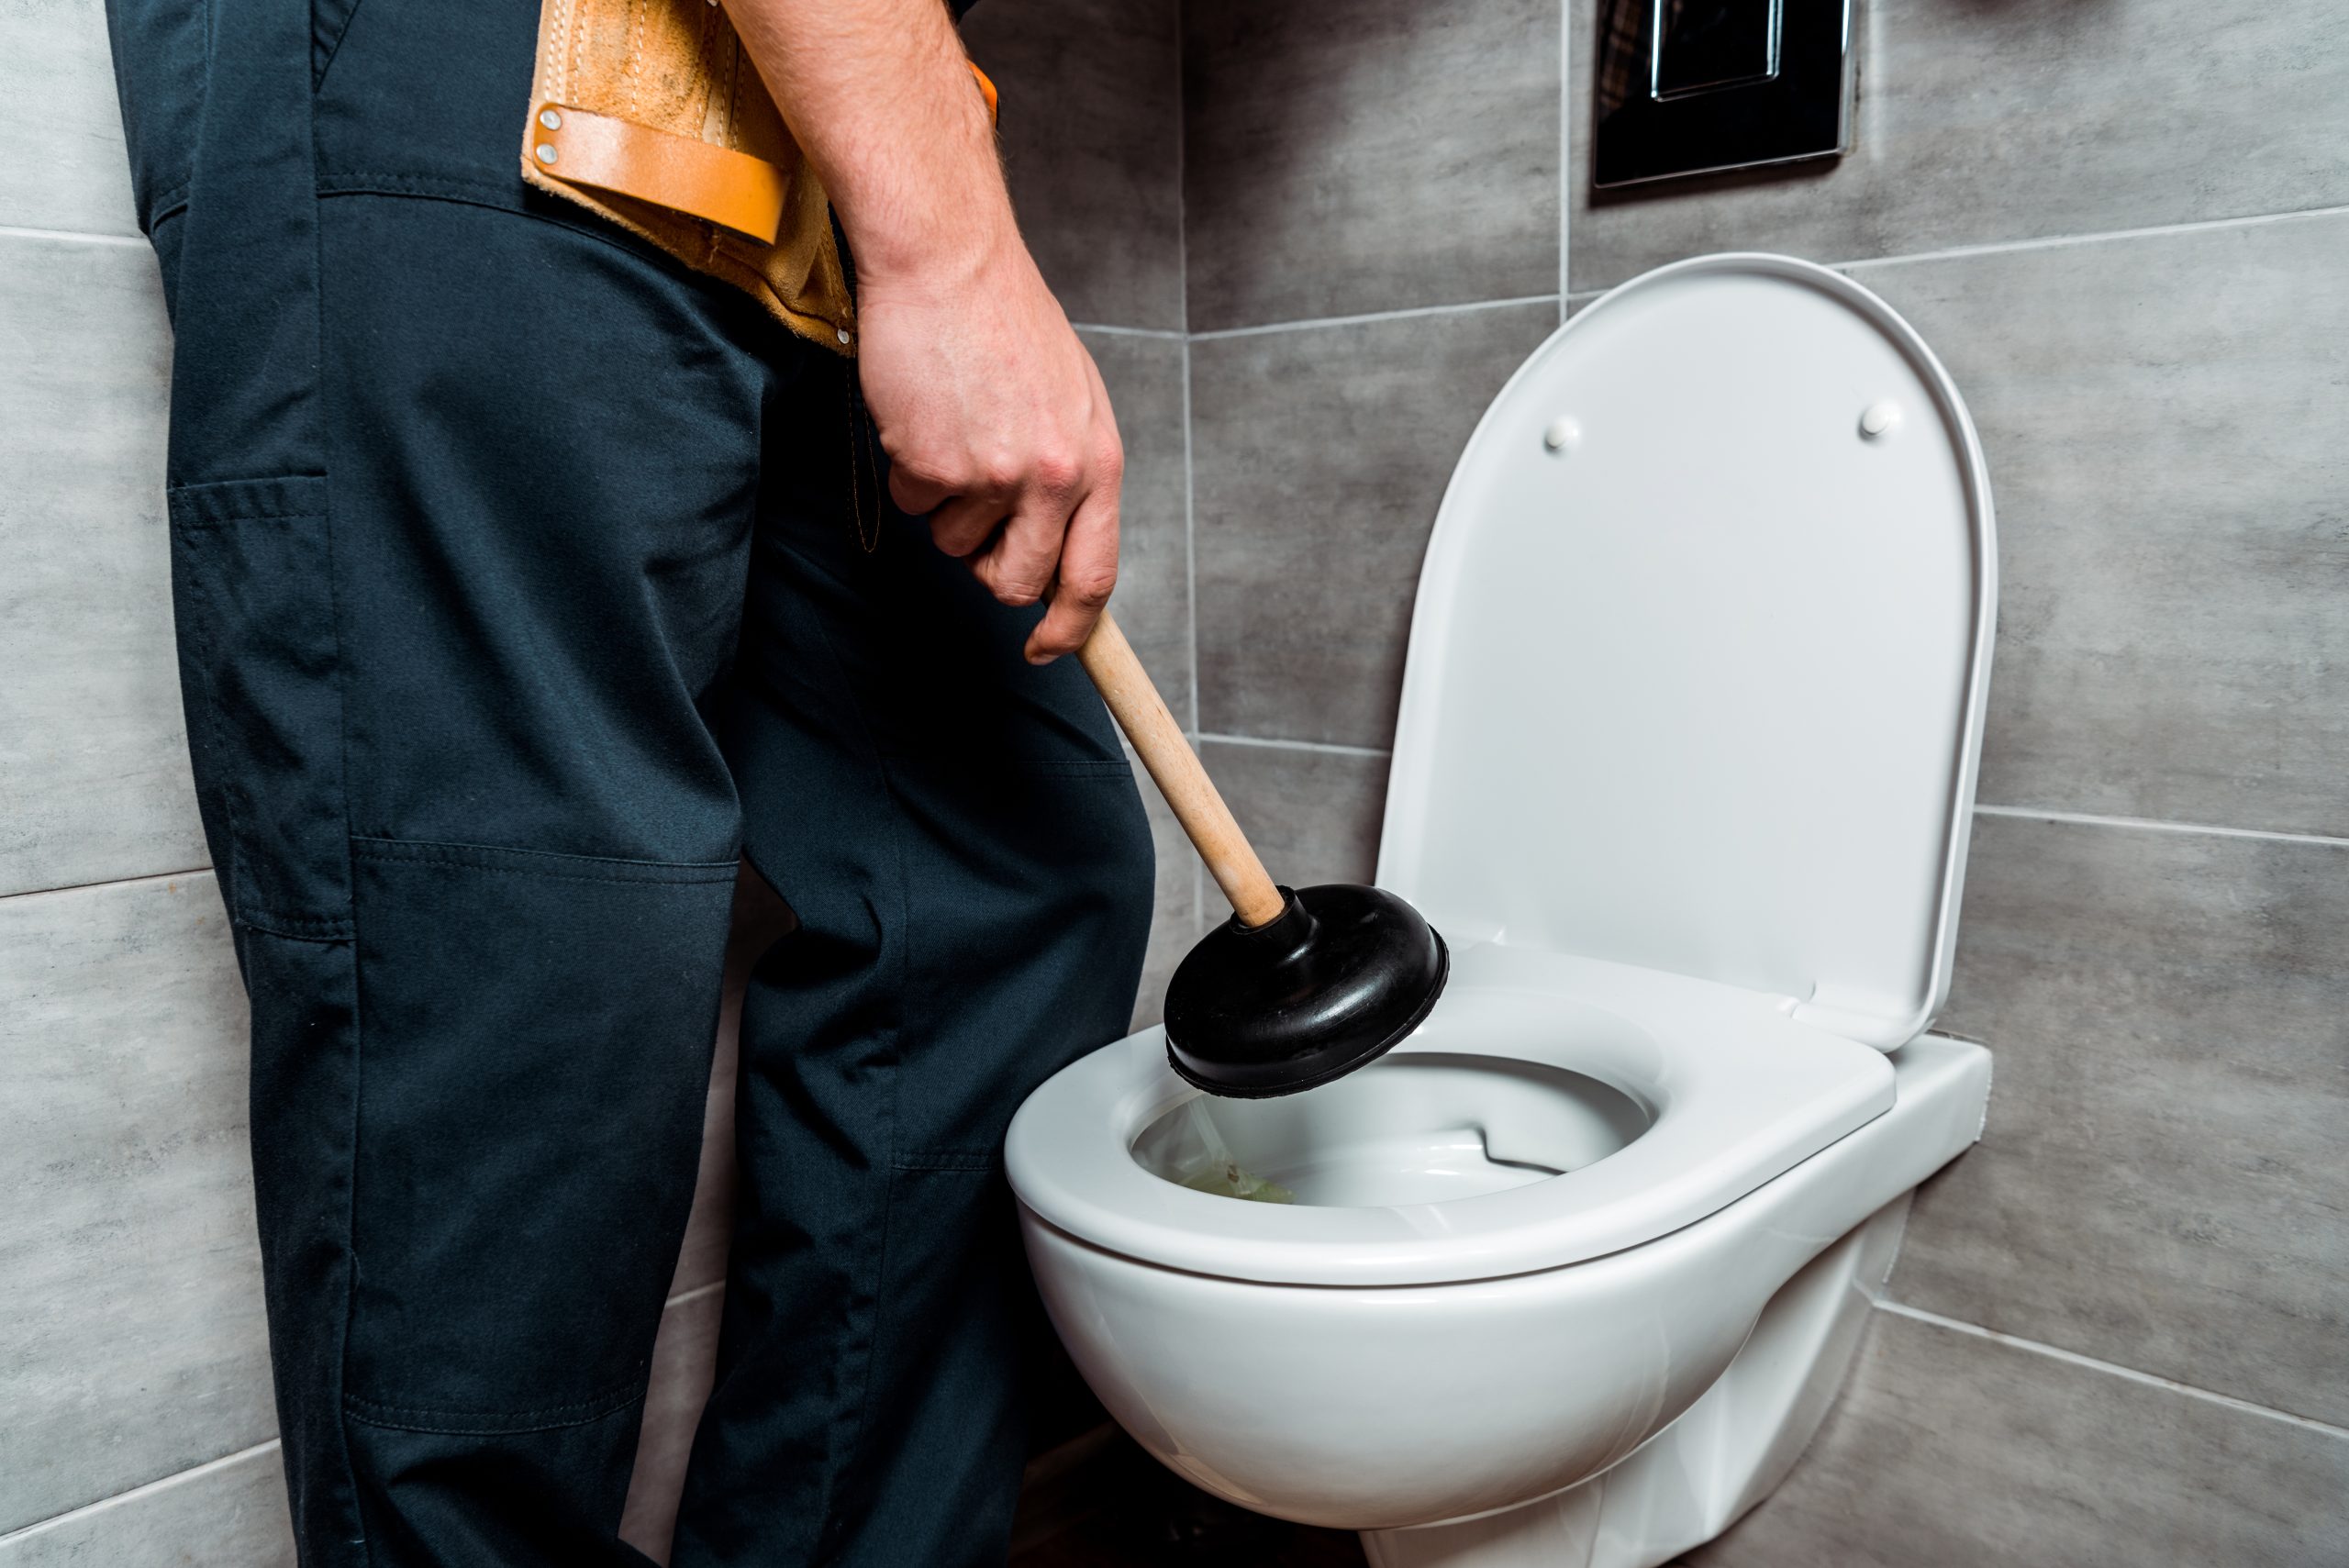 10 Ways to Unclog a Toilet without a Plunger – Henley's Plumbing & Air –  Voted Best Plumbers in Corona, Riverside, Eastvale, & San Bernardino